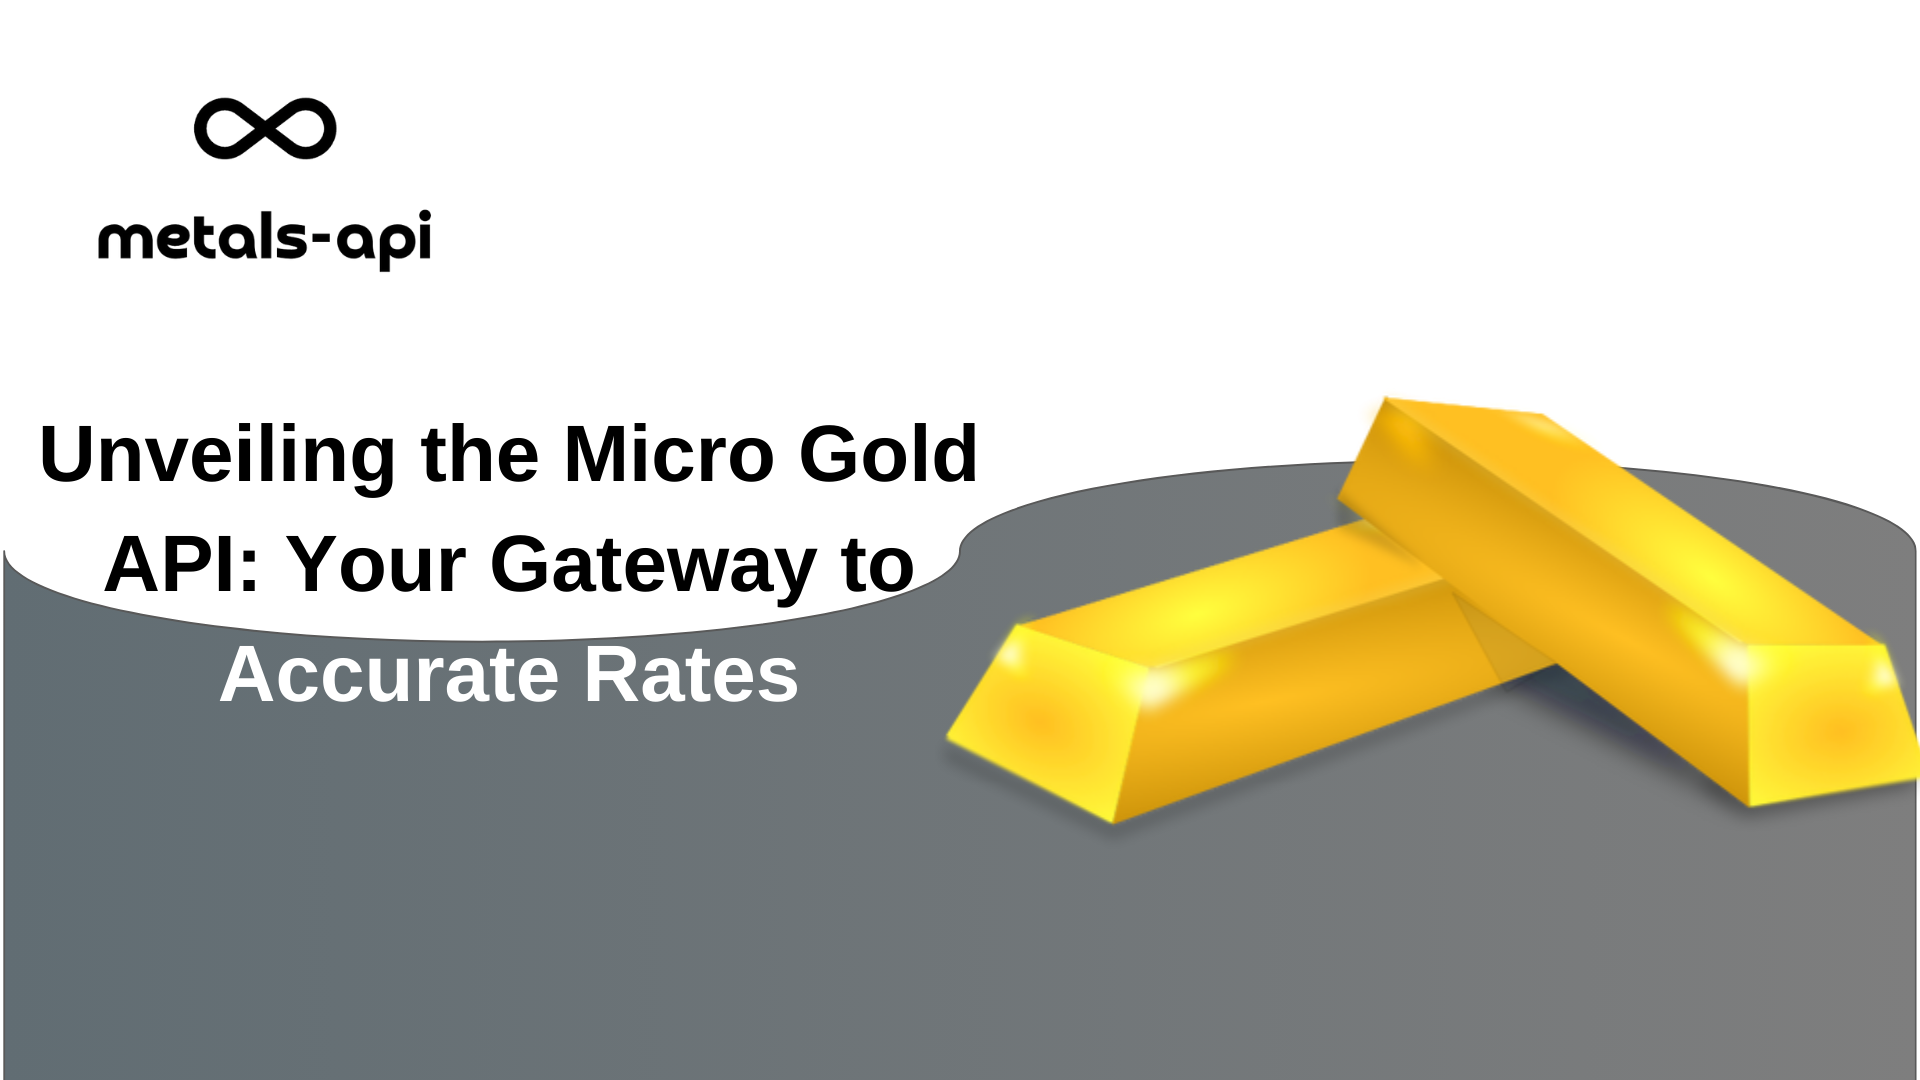 Unveiling the Micro Gold API: Your Gateway to Accurate Rates